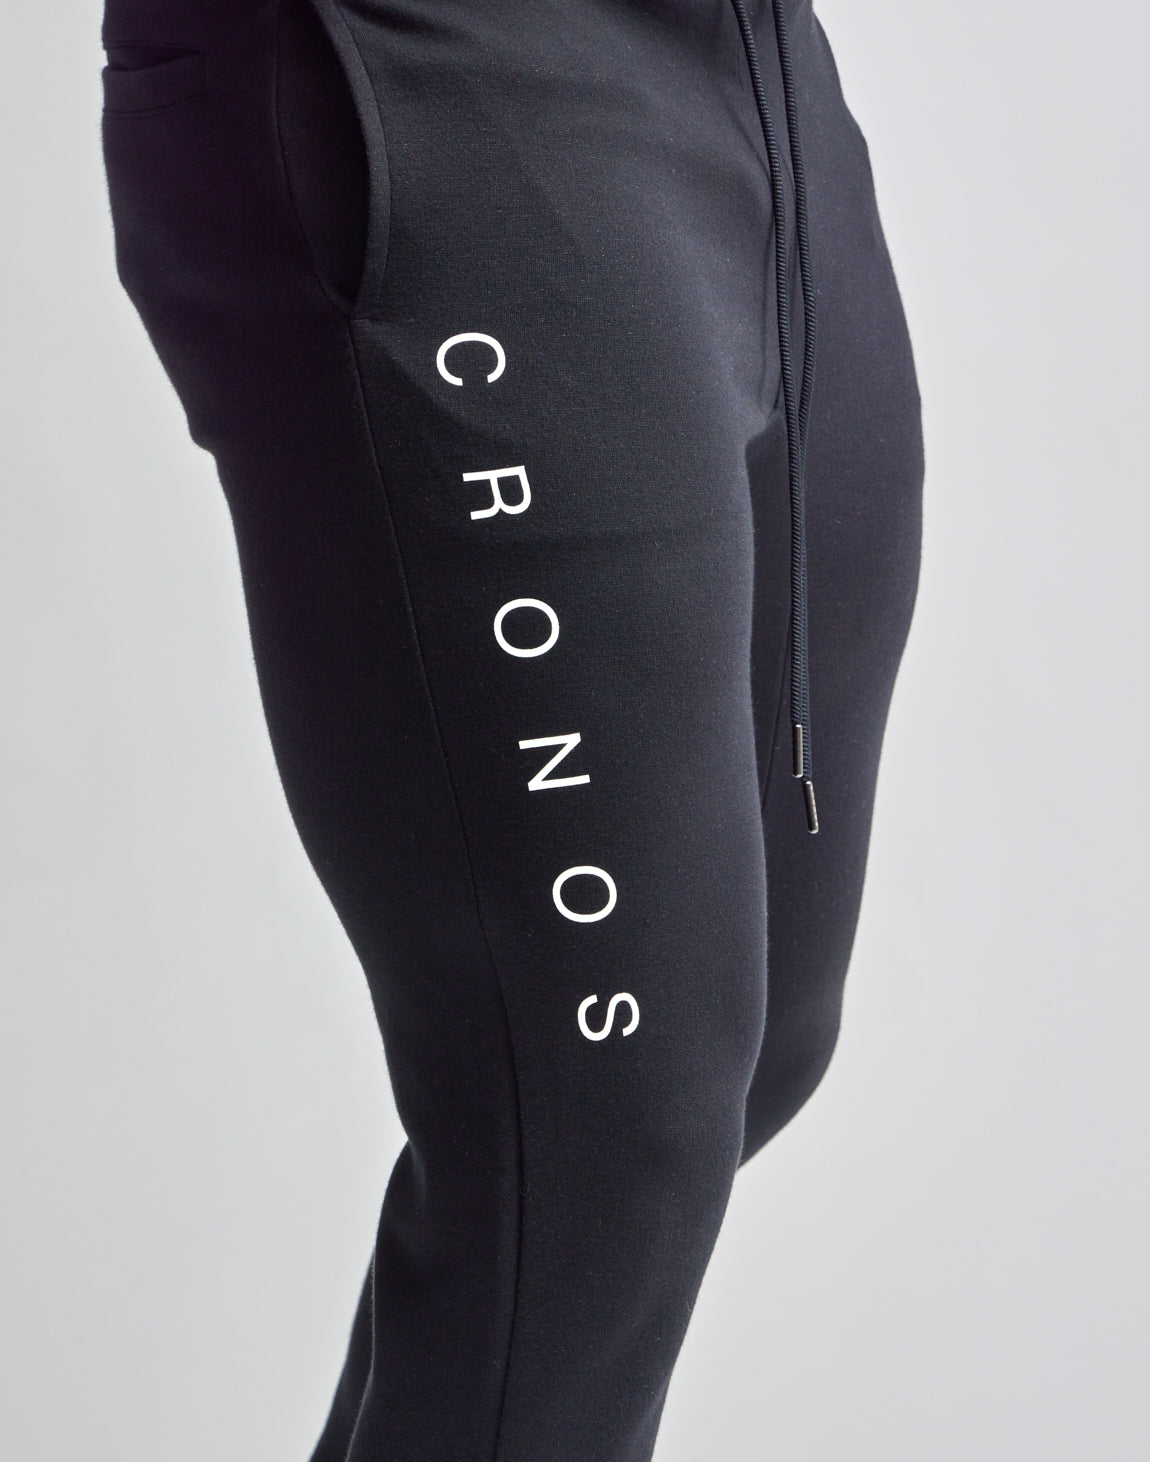 CRONOS MODE STRETCH PANTS – クロノス CRONOS Official Store